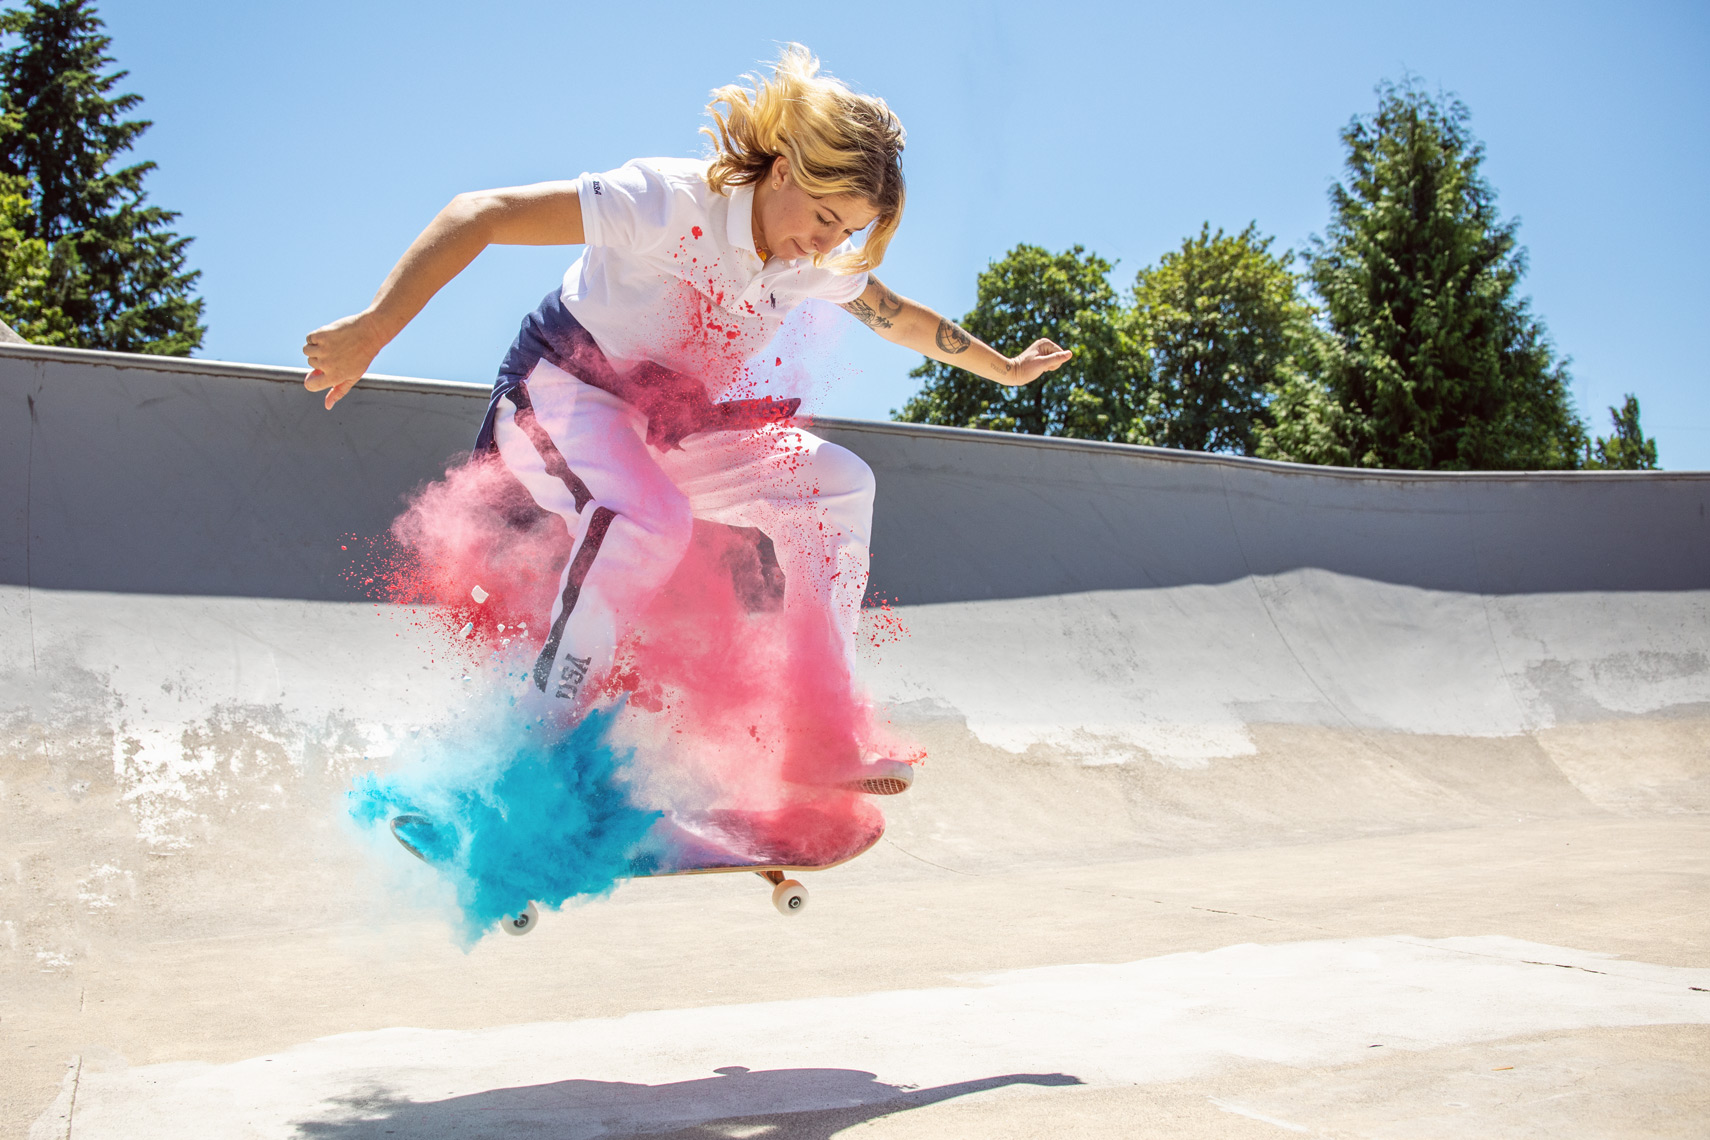 Commercial Portrait photography by Michael Schmitt - Olympic skateboarder Jordyn Barrett in the air at skate park with colored chalk exploding around her legs. 